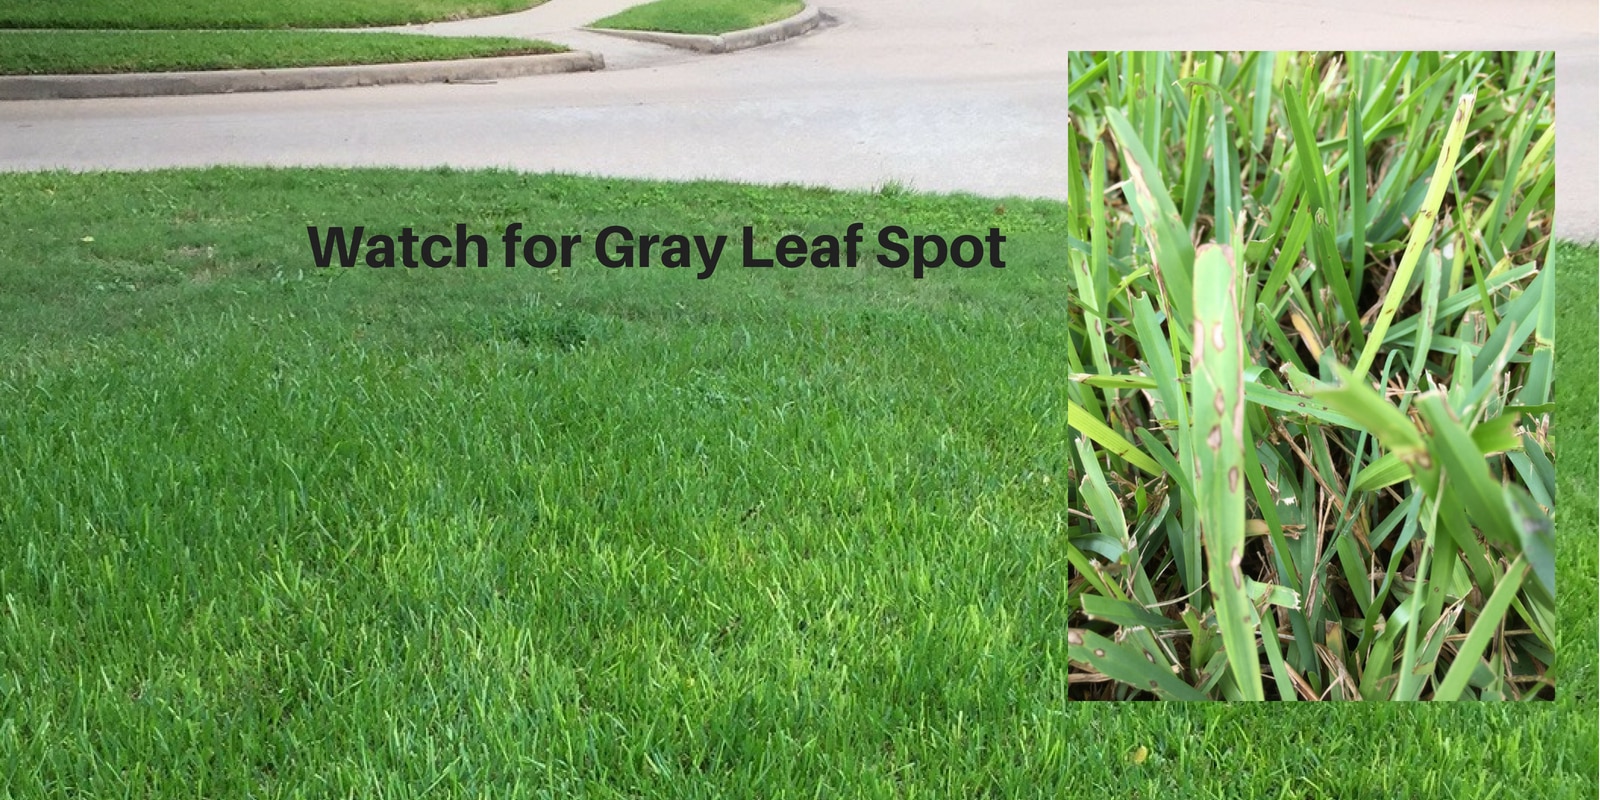 Watch for Gray Leaf Spot in your Houston area lawn